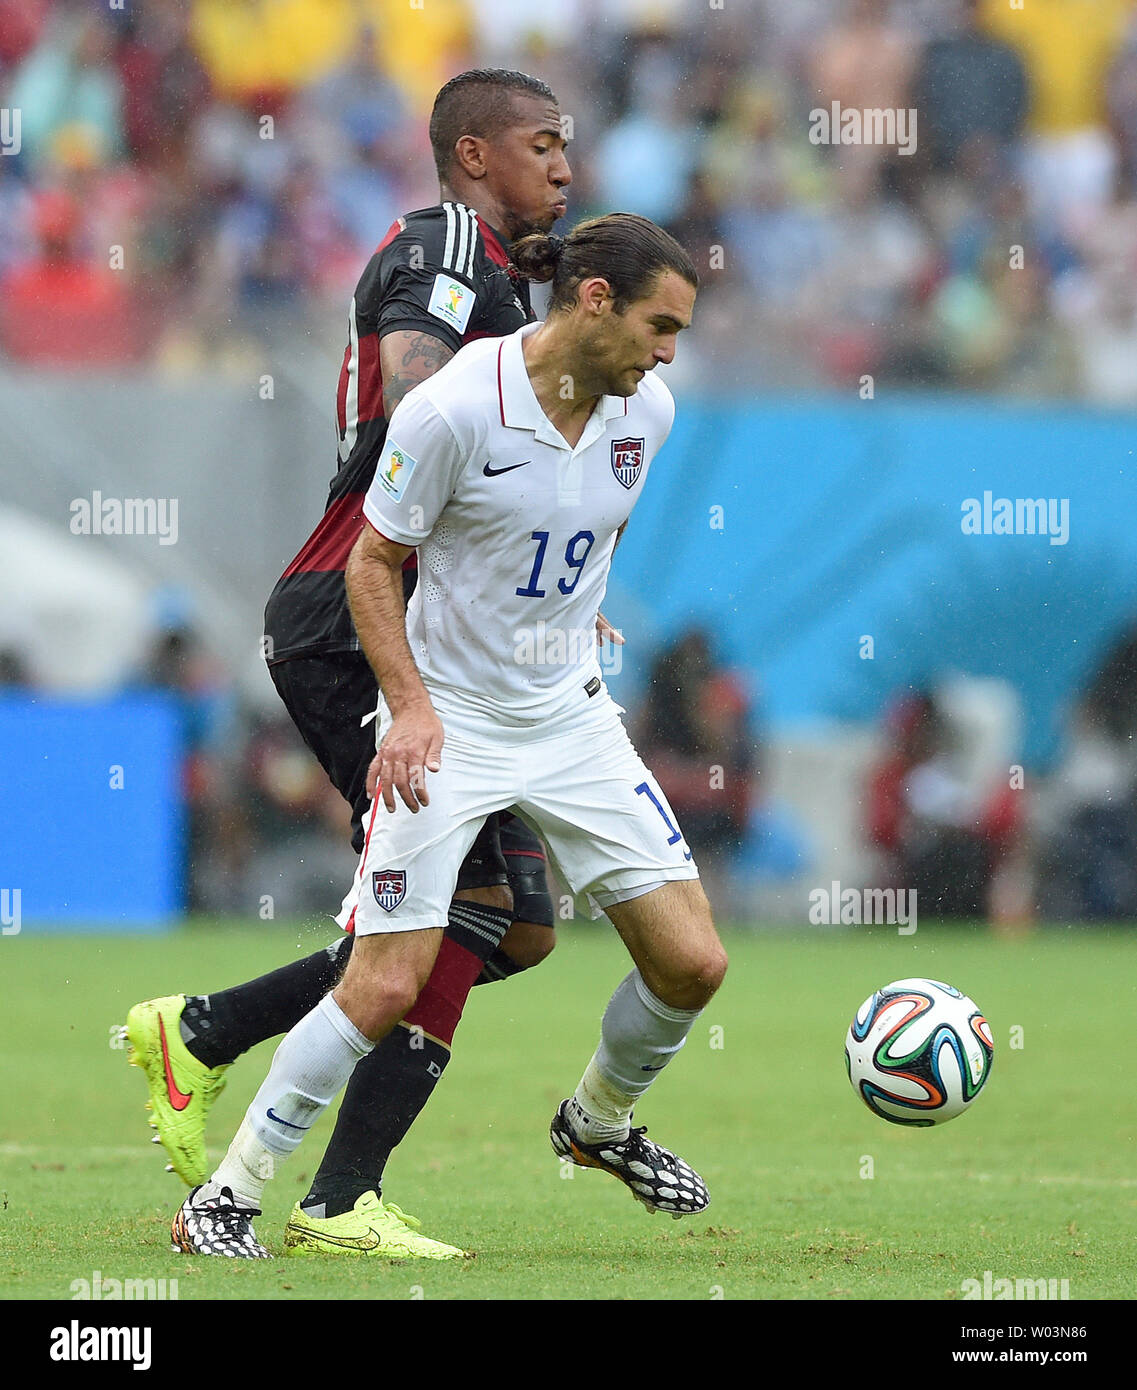 Graham Zusi of USA challenges Jerome Boateng (L) of Germany during the 2014 FIFA World Cup Group G match at the Arena Pernambuco in Recife, Brazil on June 26, 2014. UPI/Chris Brunskill Stock Photo